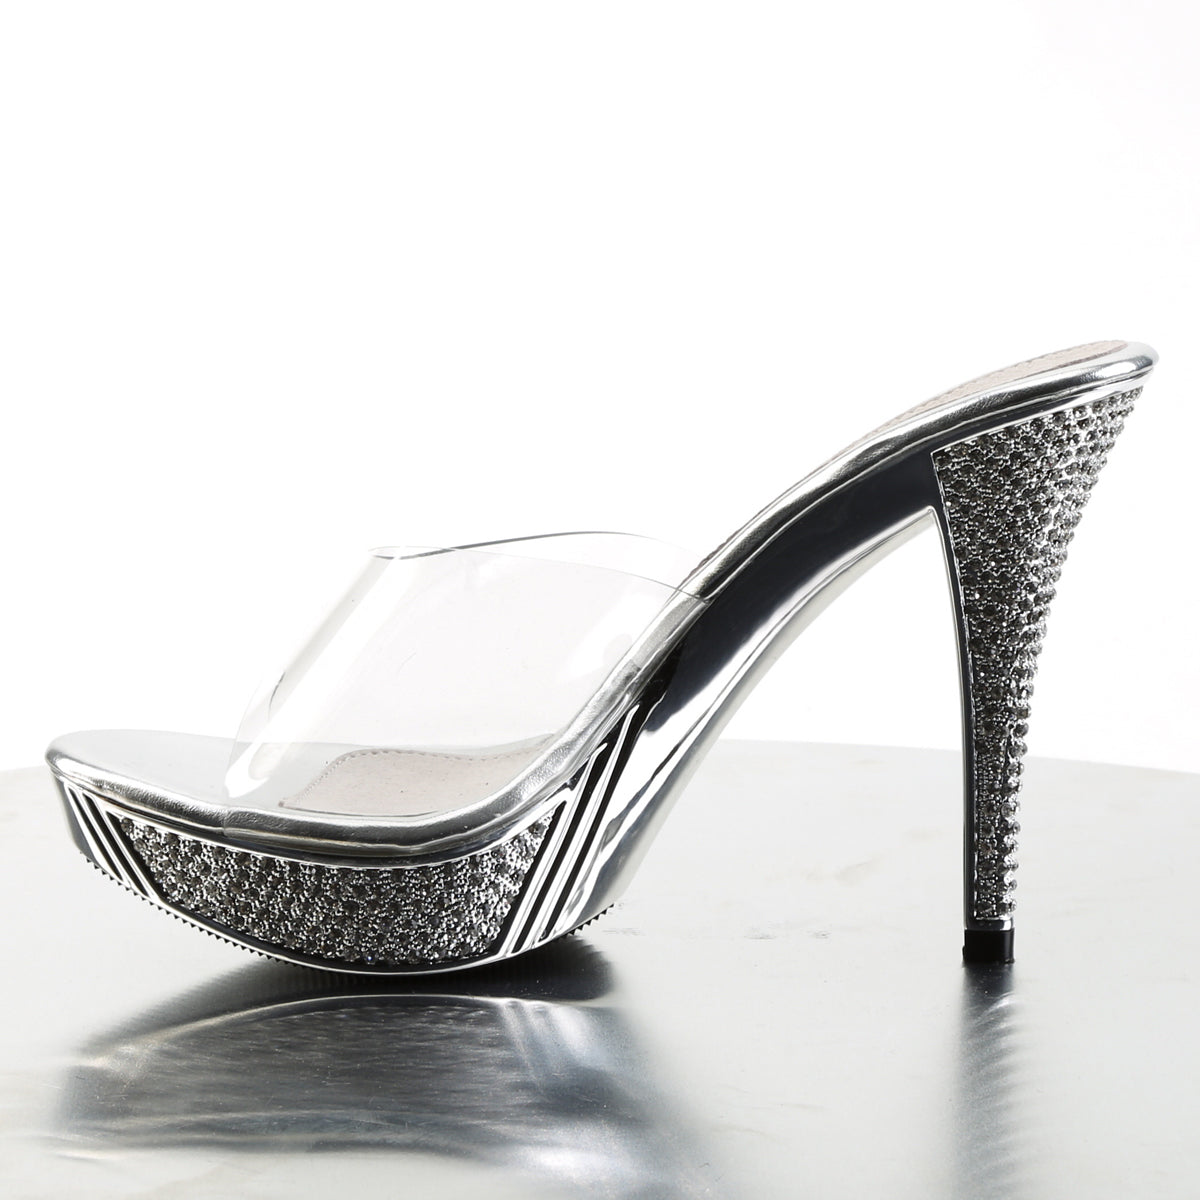 ELEGANT-401 Fabulicious Clear/Silver Chrome Shoes [Posing Heels]